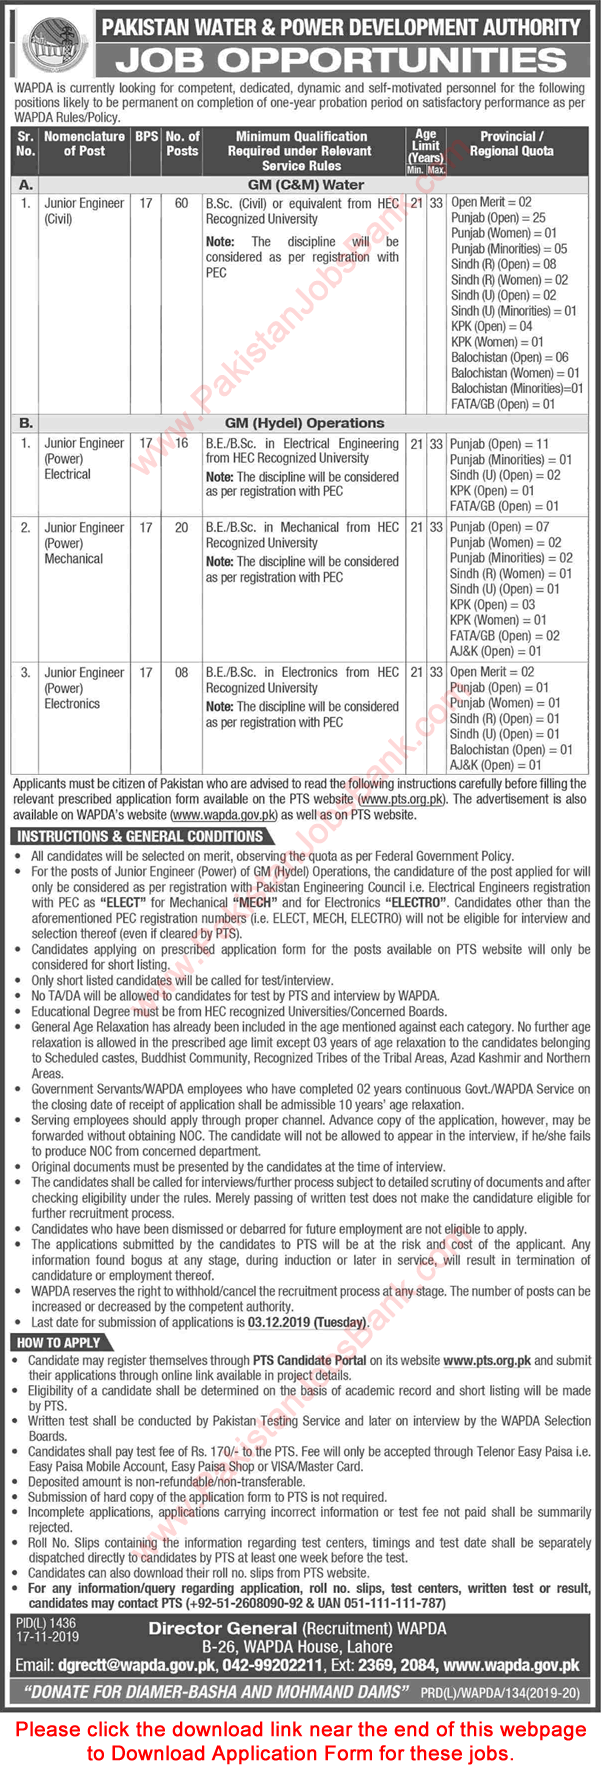 WAPDA Jobs November 2019 PTS Application Form Civil Engineers & Others Water and Power Development Authority Latest